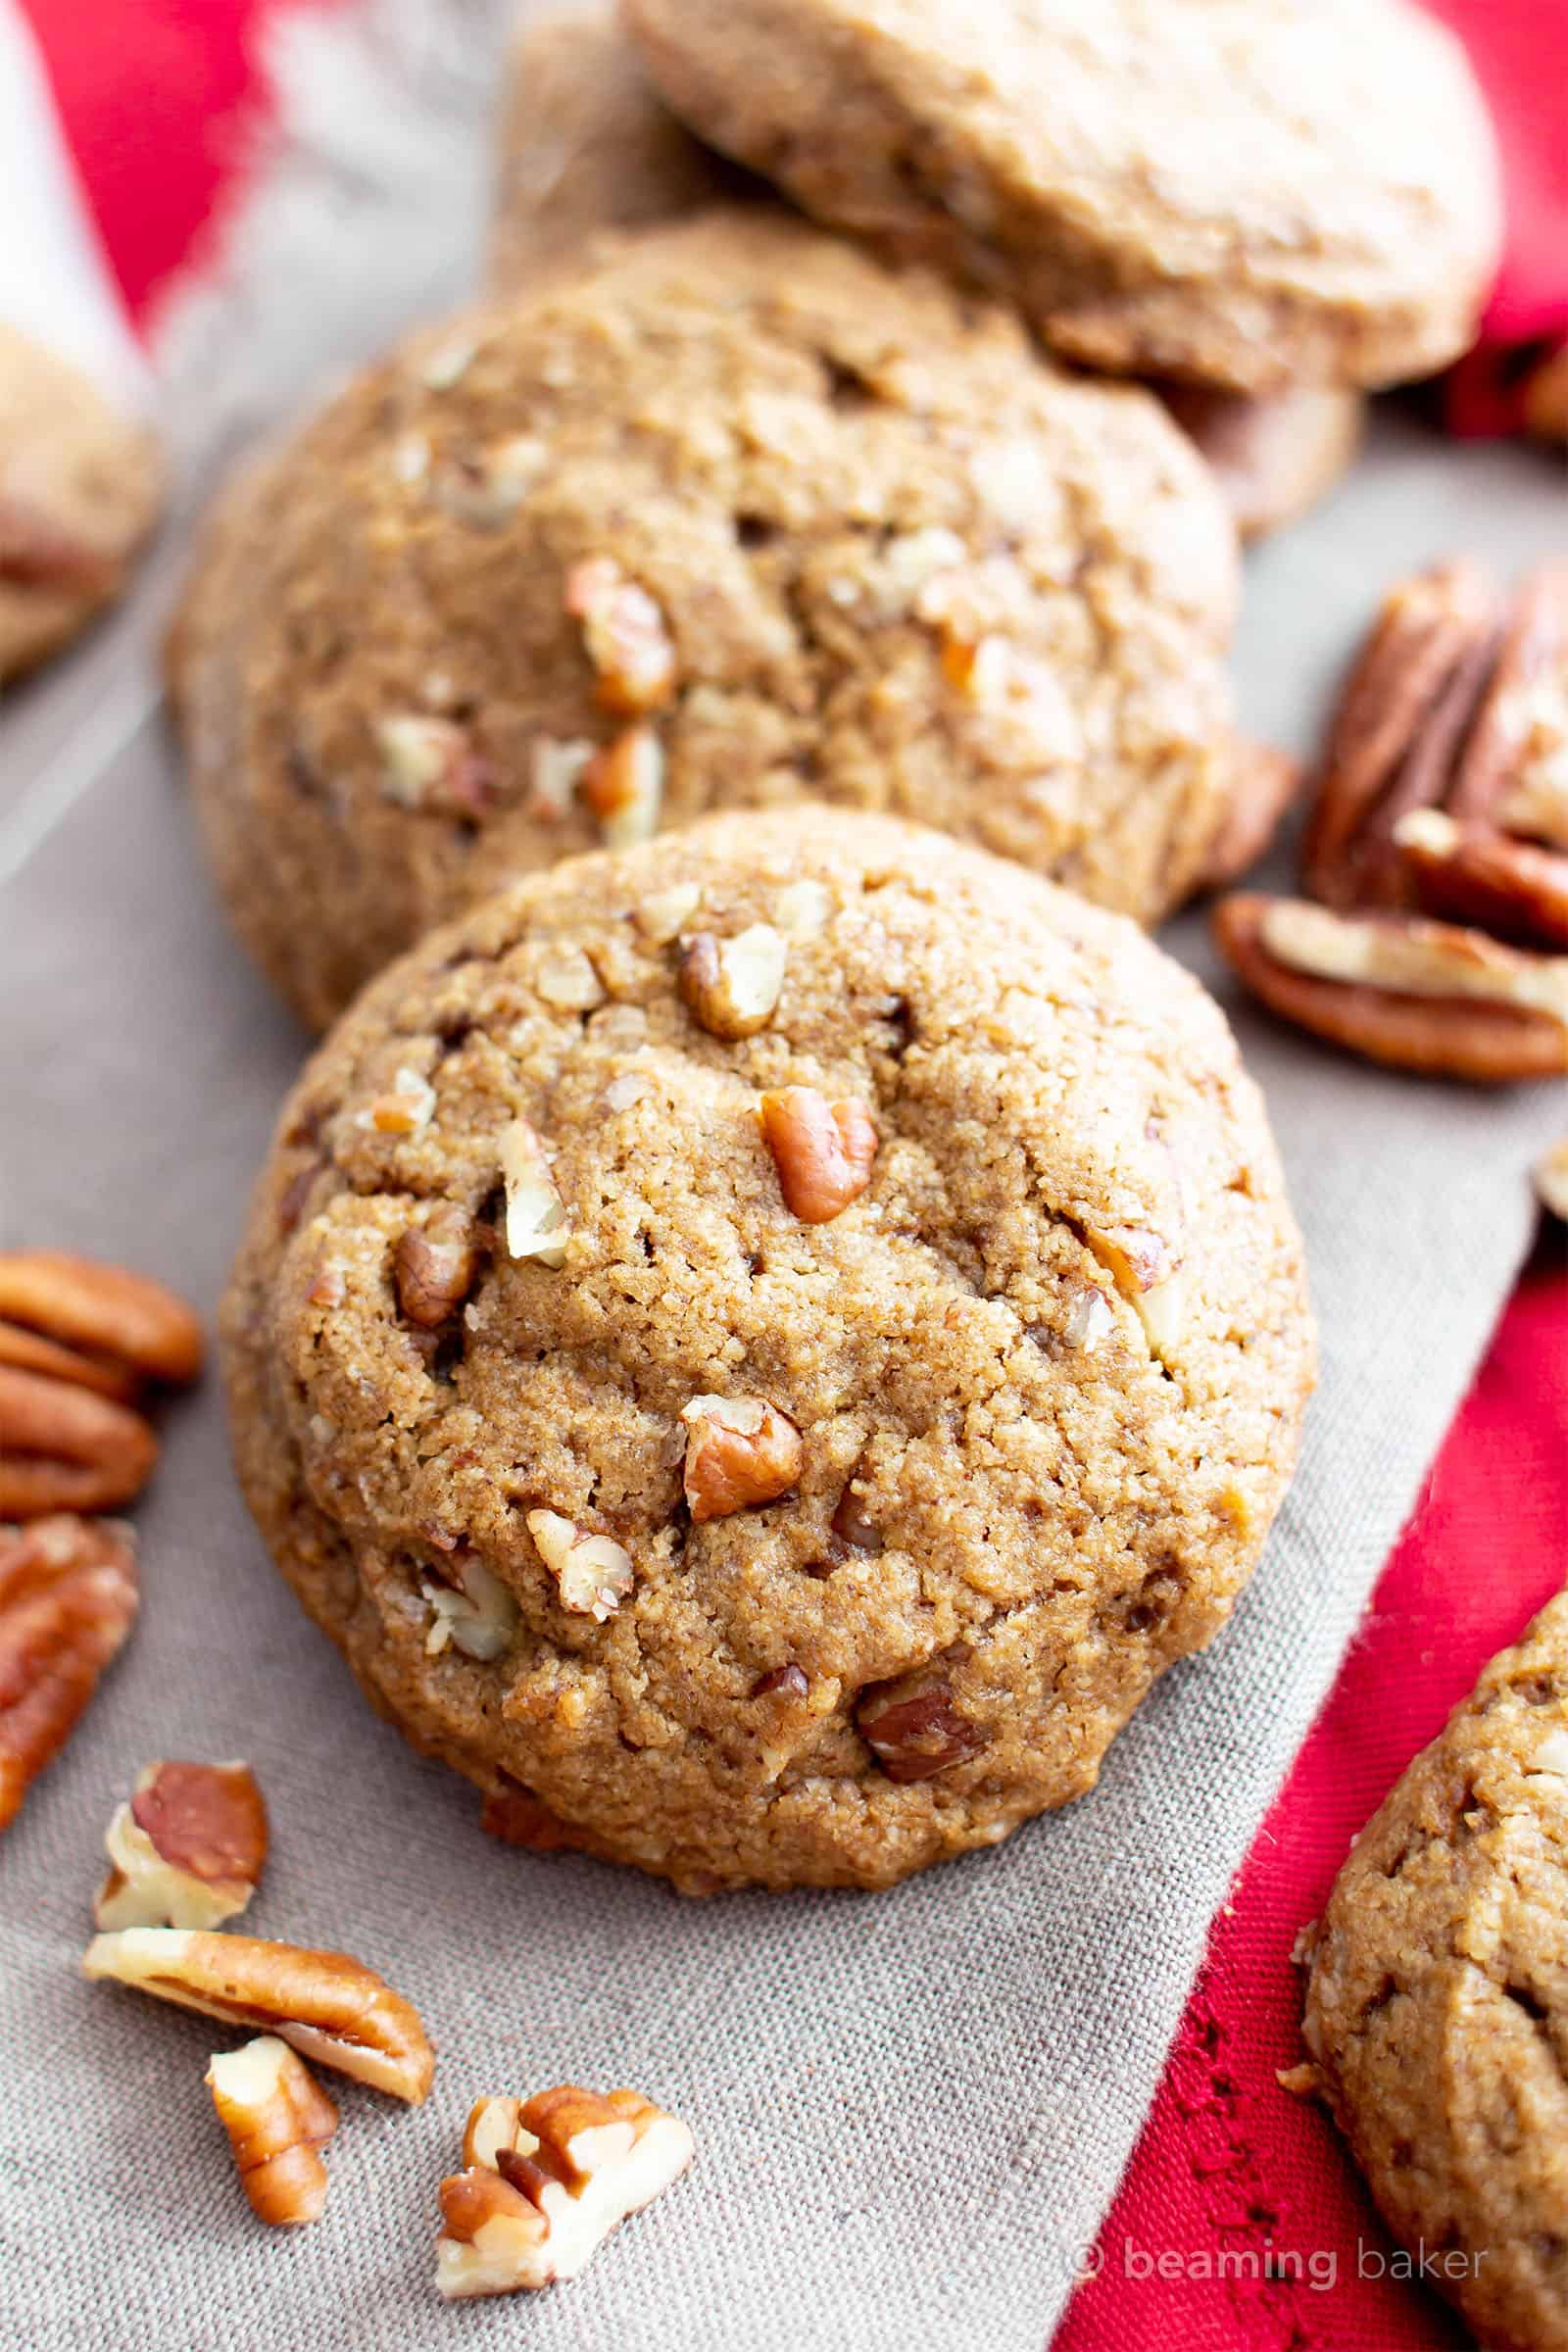 Easy Vegan Cinnamon Pecan Cookies (V, GF): an easy recipe for chewy on the outside, soft on the inside buttery gluten free pecan cookies bursting with pecan crunch and a cinnamon kick! Made with healthy ingredients. #Cookies #BeamingBaker #Vegan #GlutenFree #GlutenFreeCookies #Christmas #HealthyBaking #VeganCookies | Recipe at BeamingBaker.com